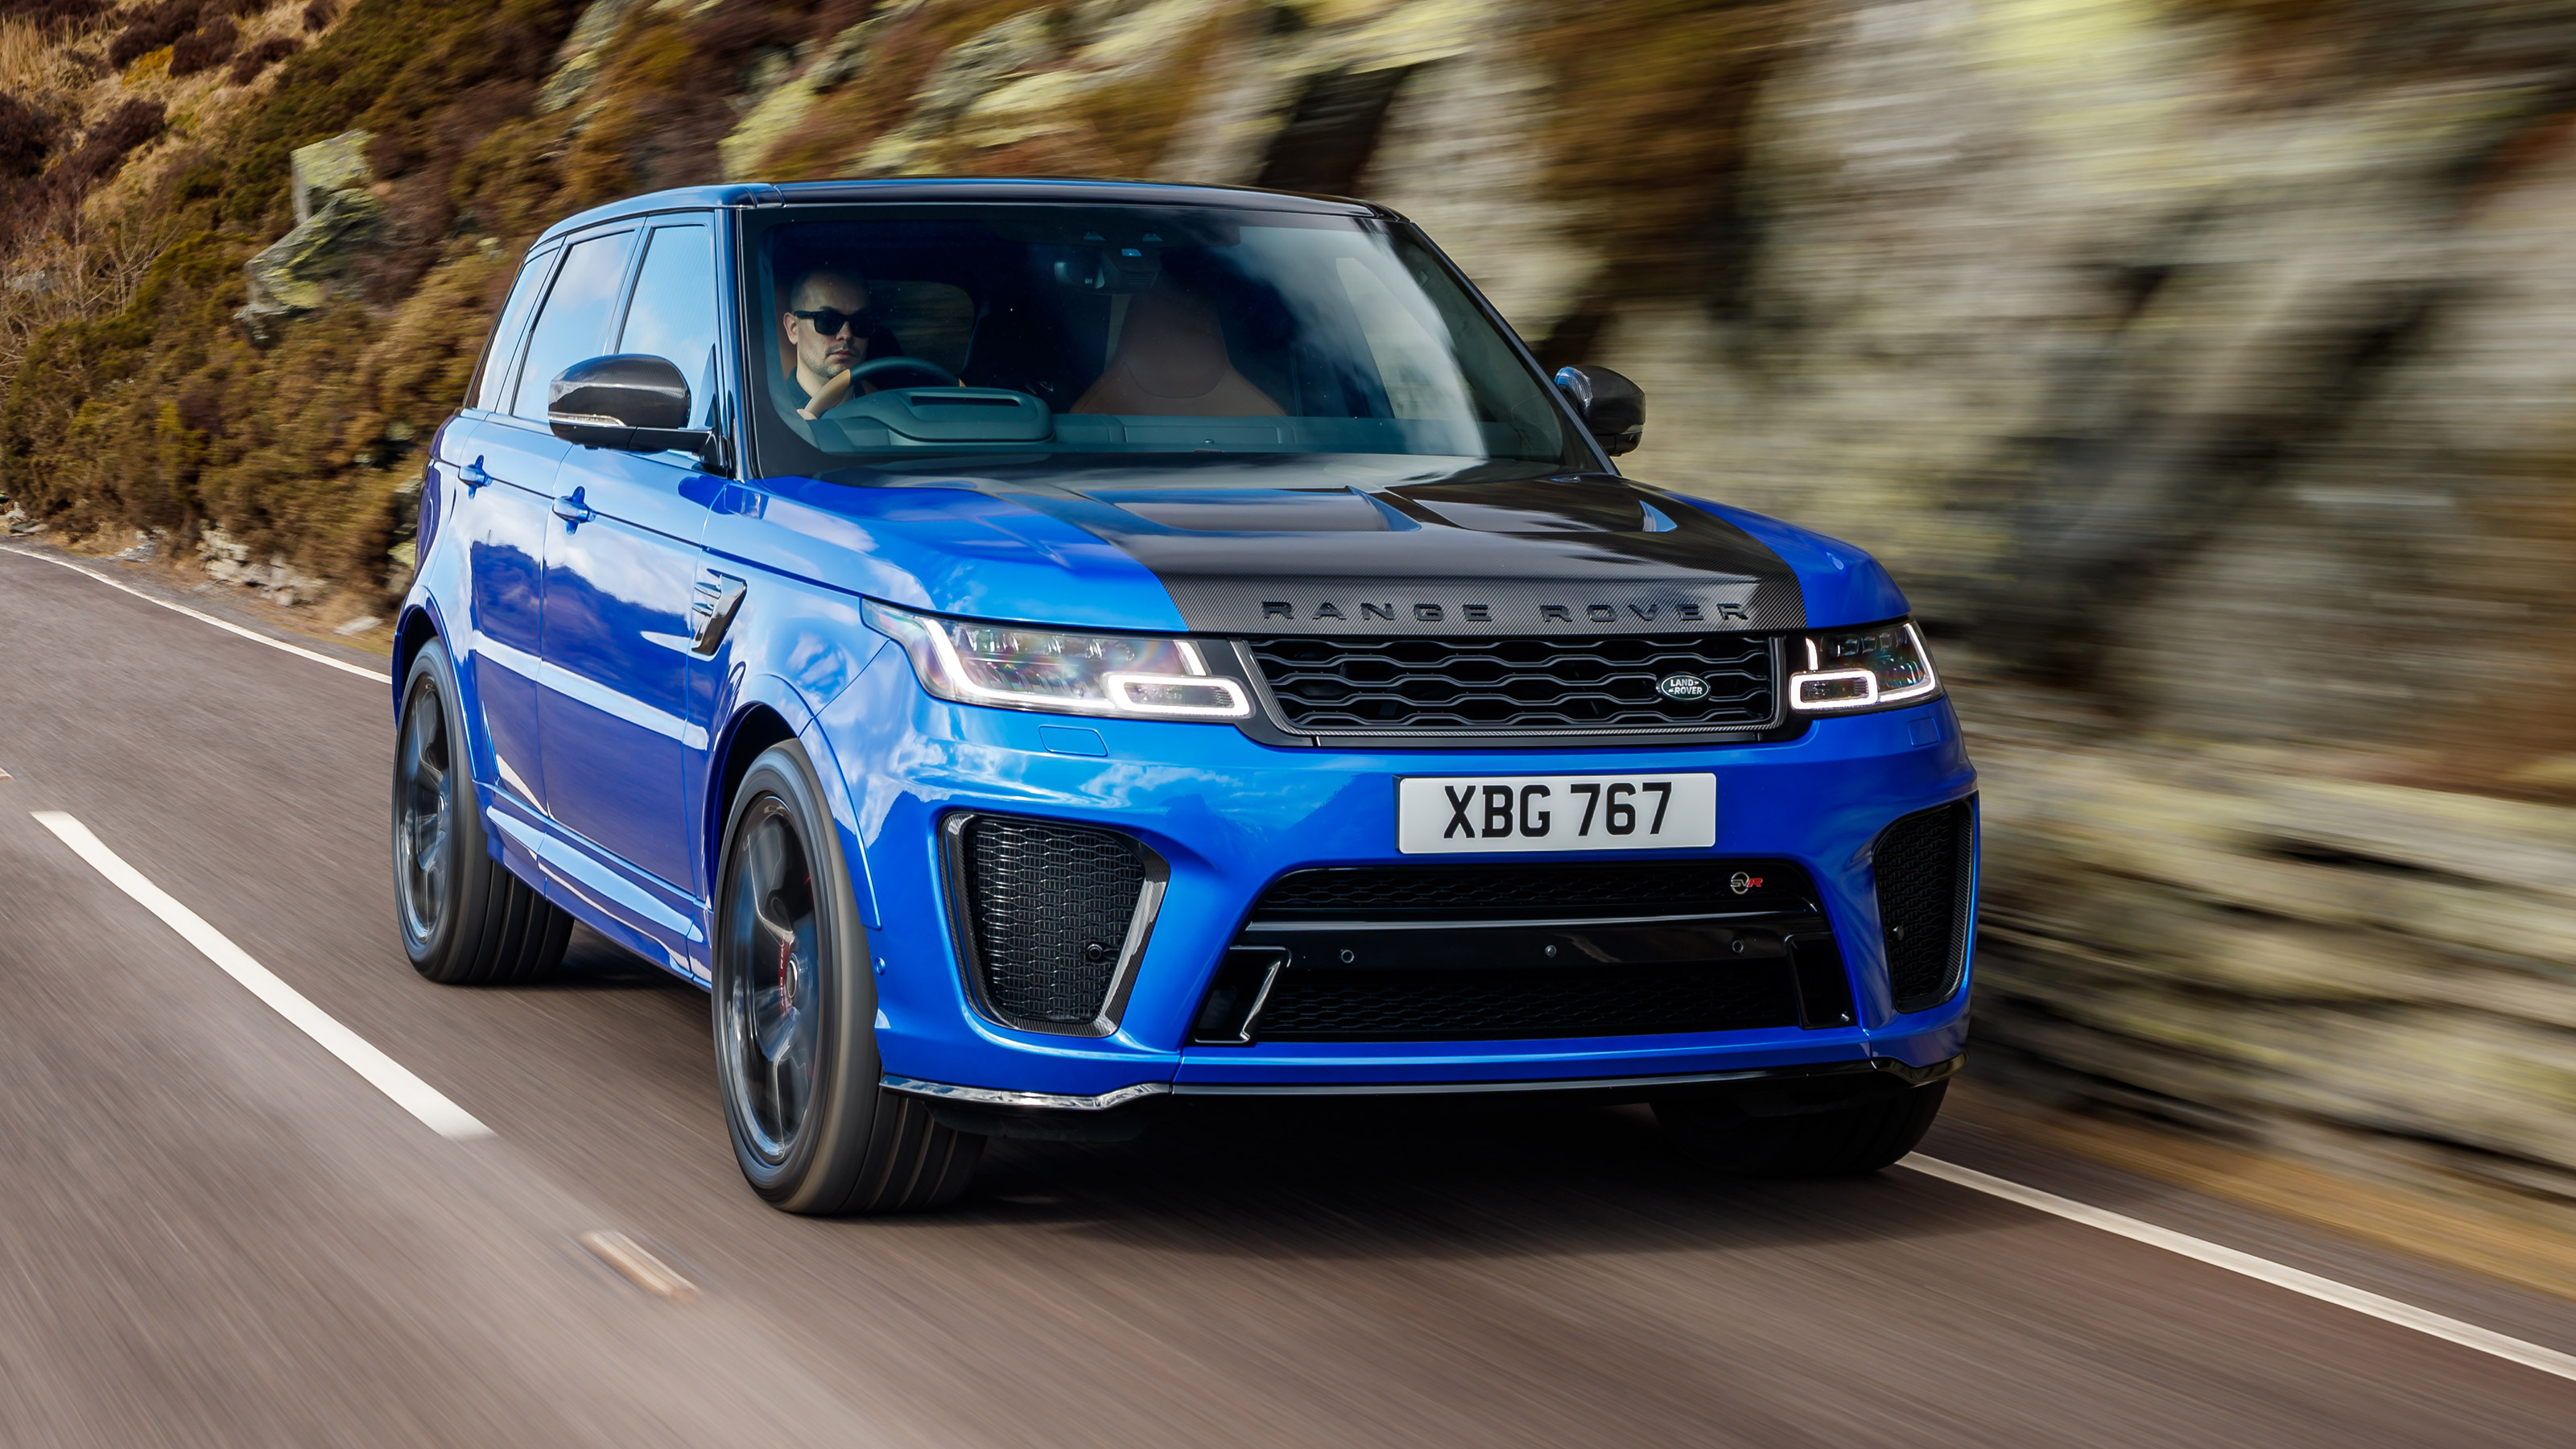 This is the 176mph, £123,900 Range Rover Sport SVR 'Ultimate